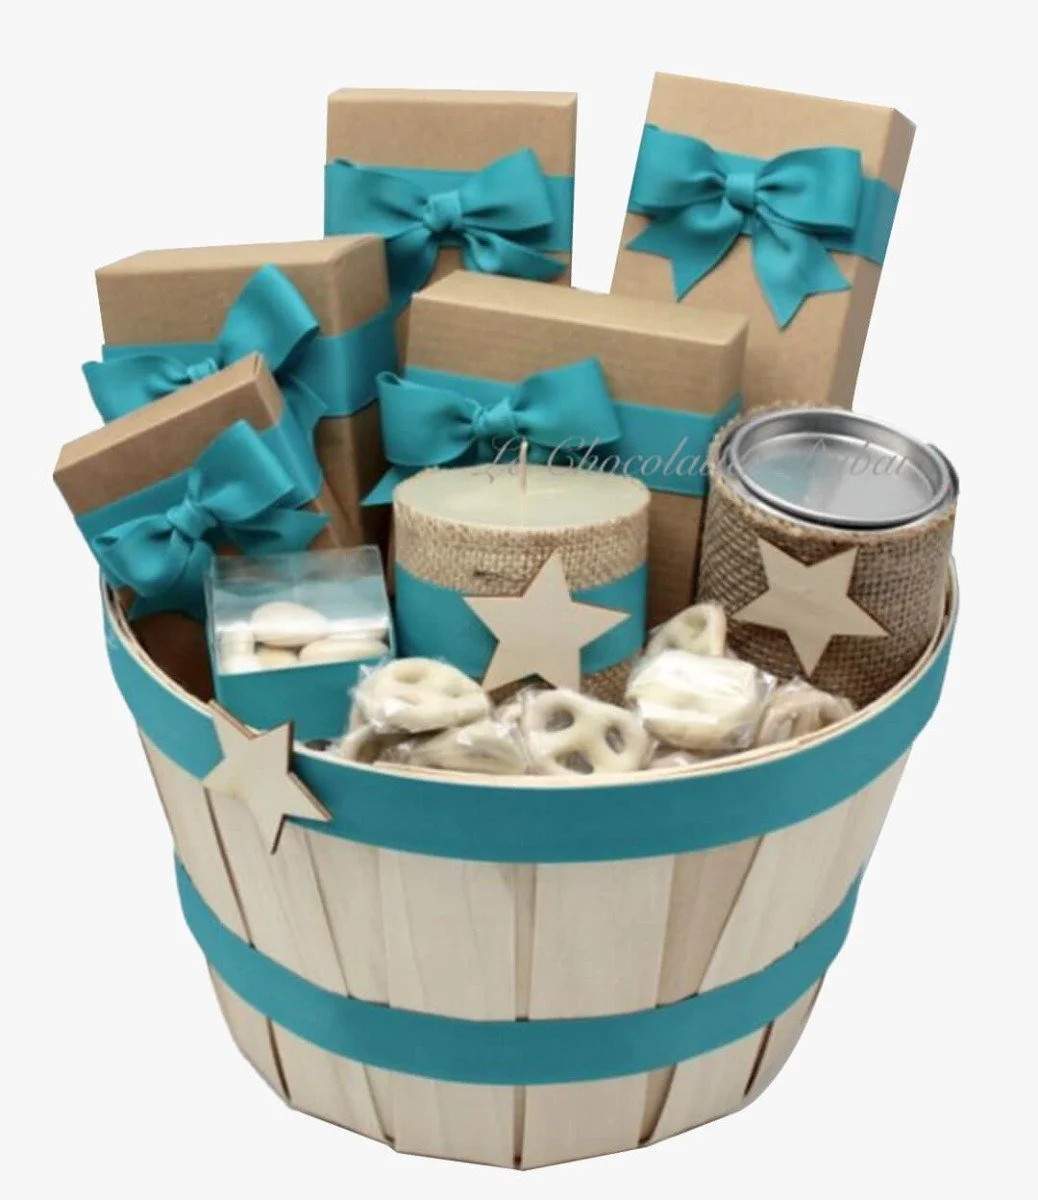 Stars Decorated Chocolate Sweets Bucket Hamper - Blue By Le Chocolatier